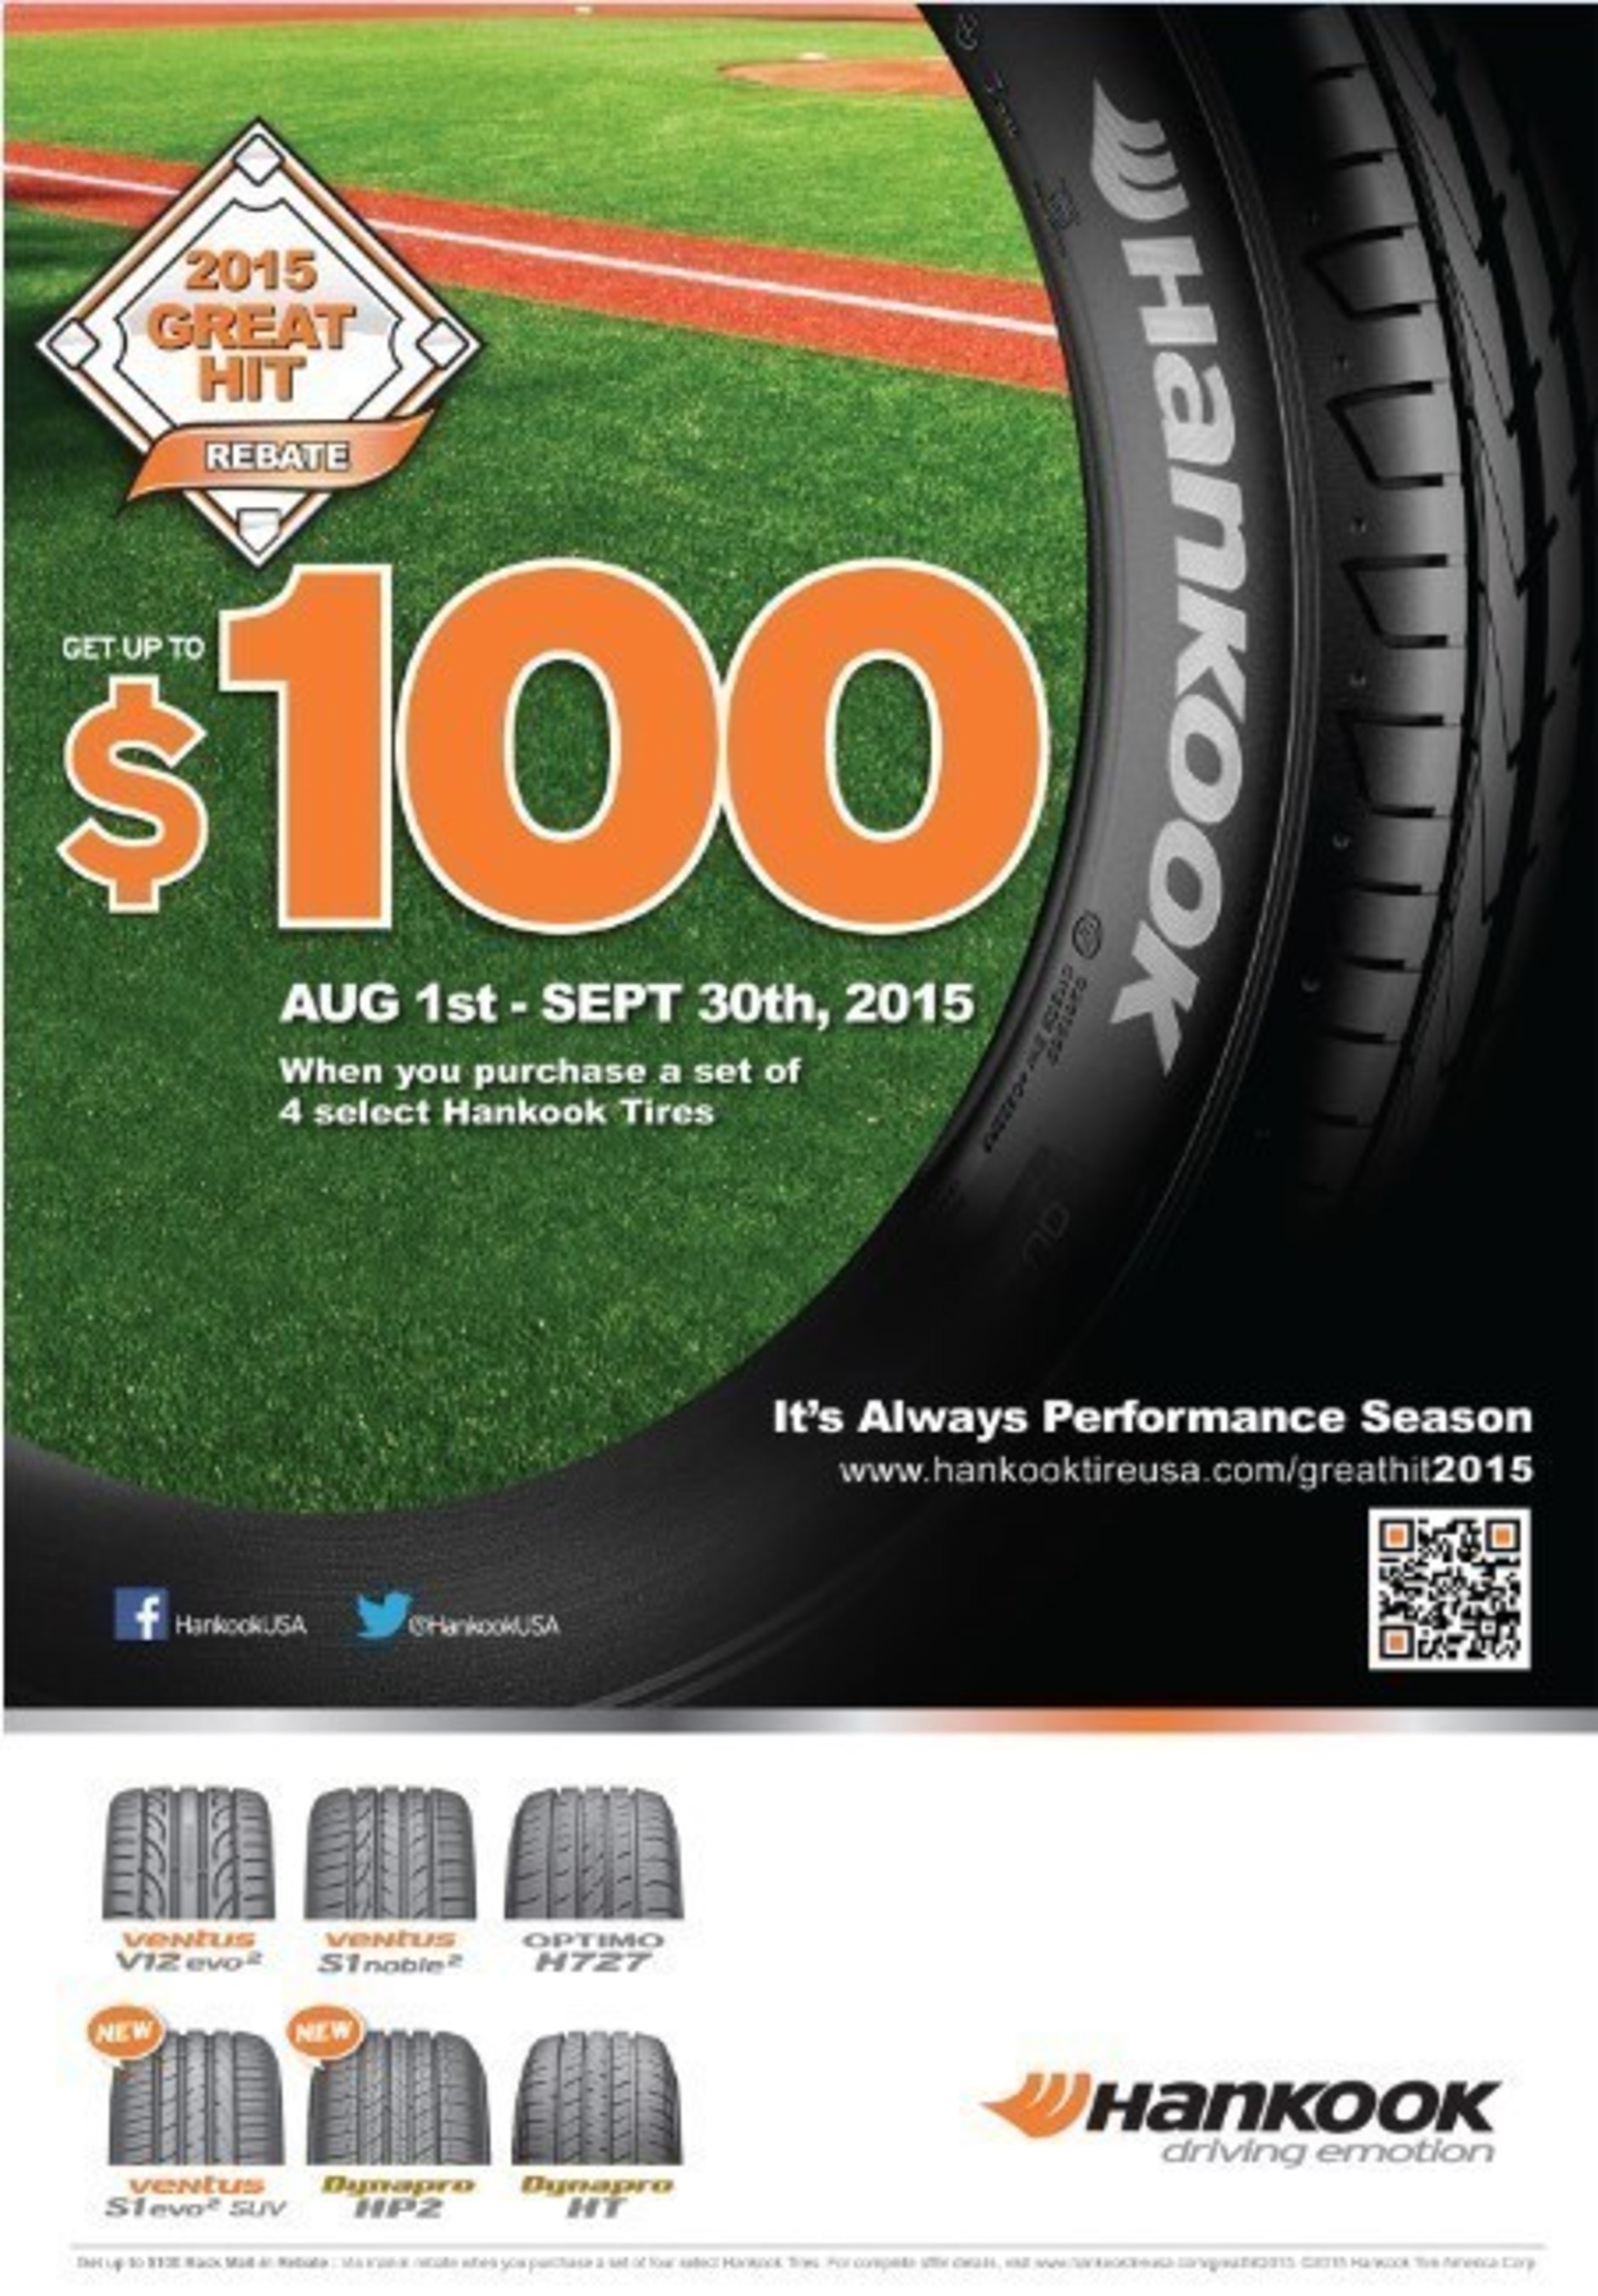 hankook-offers-consumers-a-home-run-with-2015-great-hit-rebate